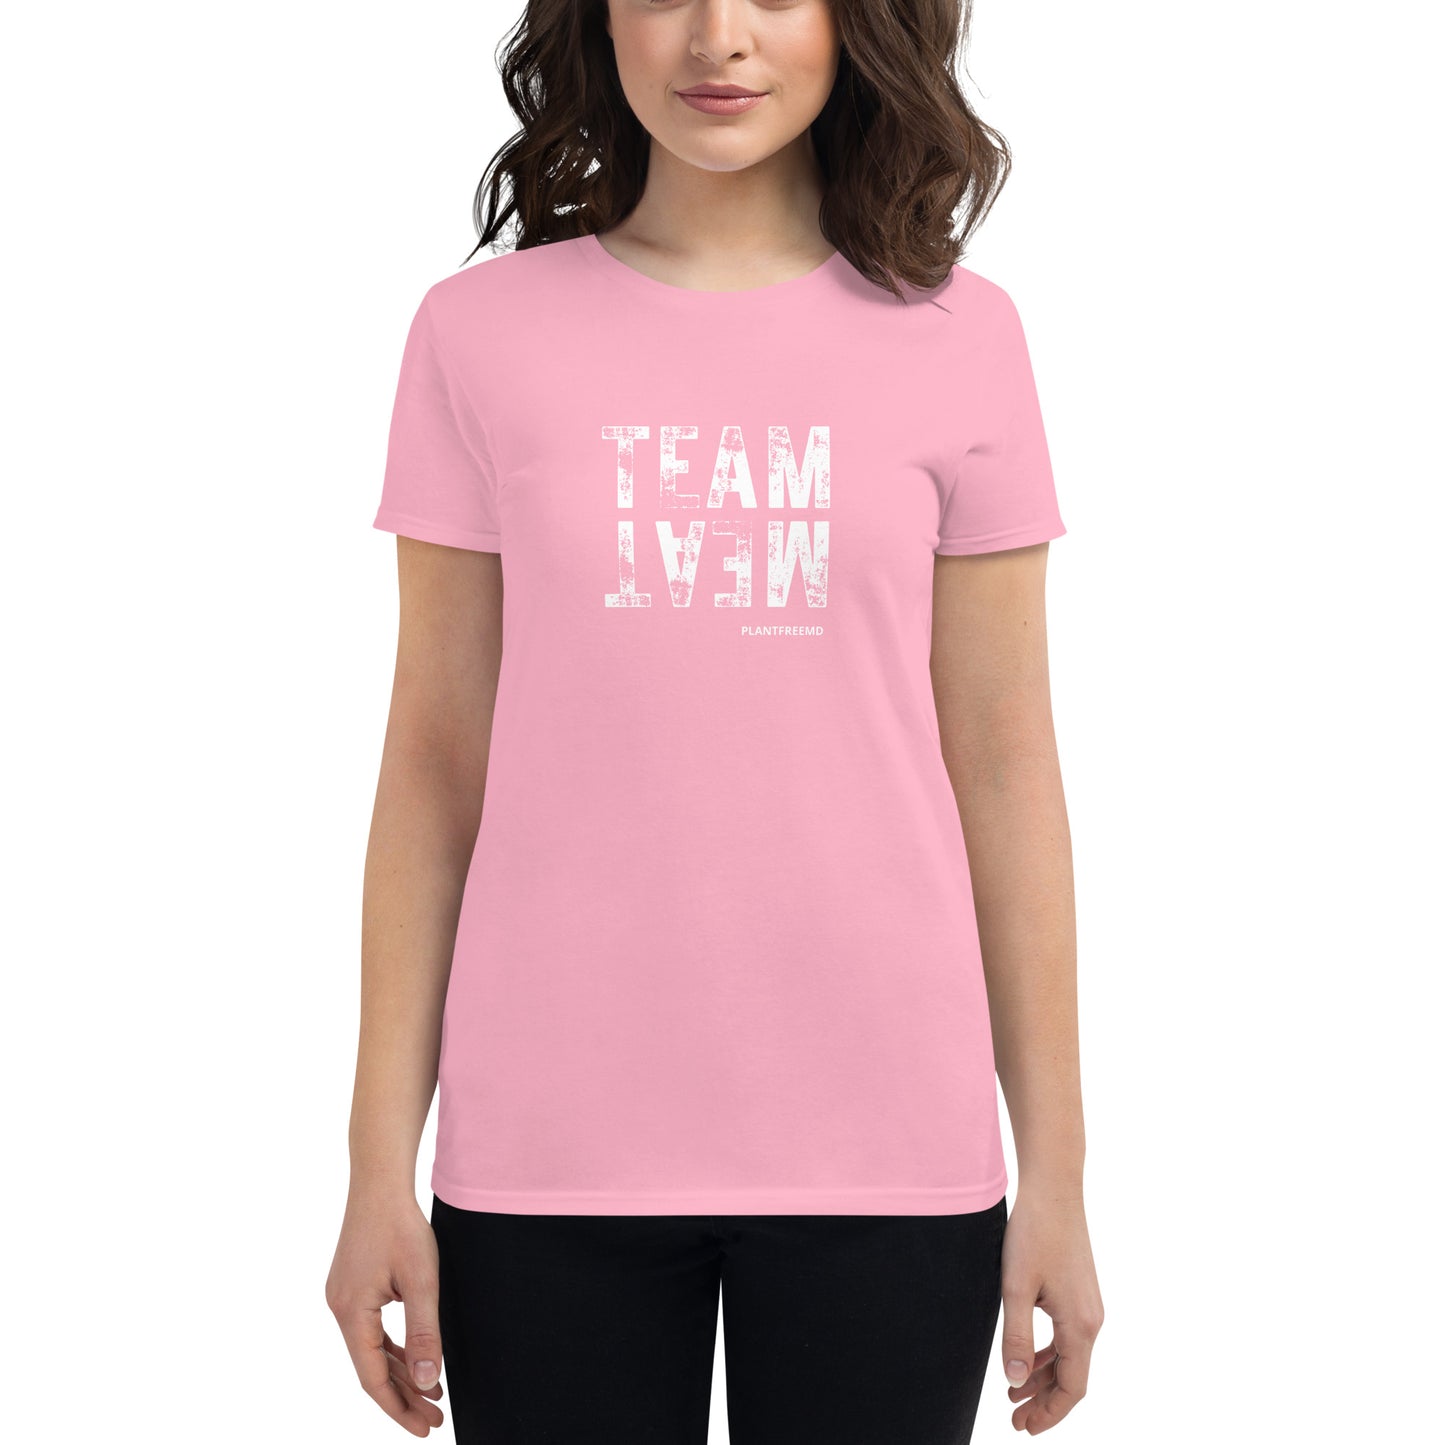 Team Meat Women's Fitted T-shirt